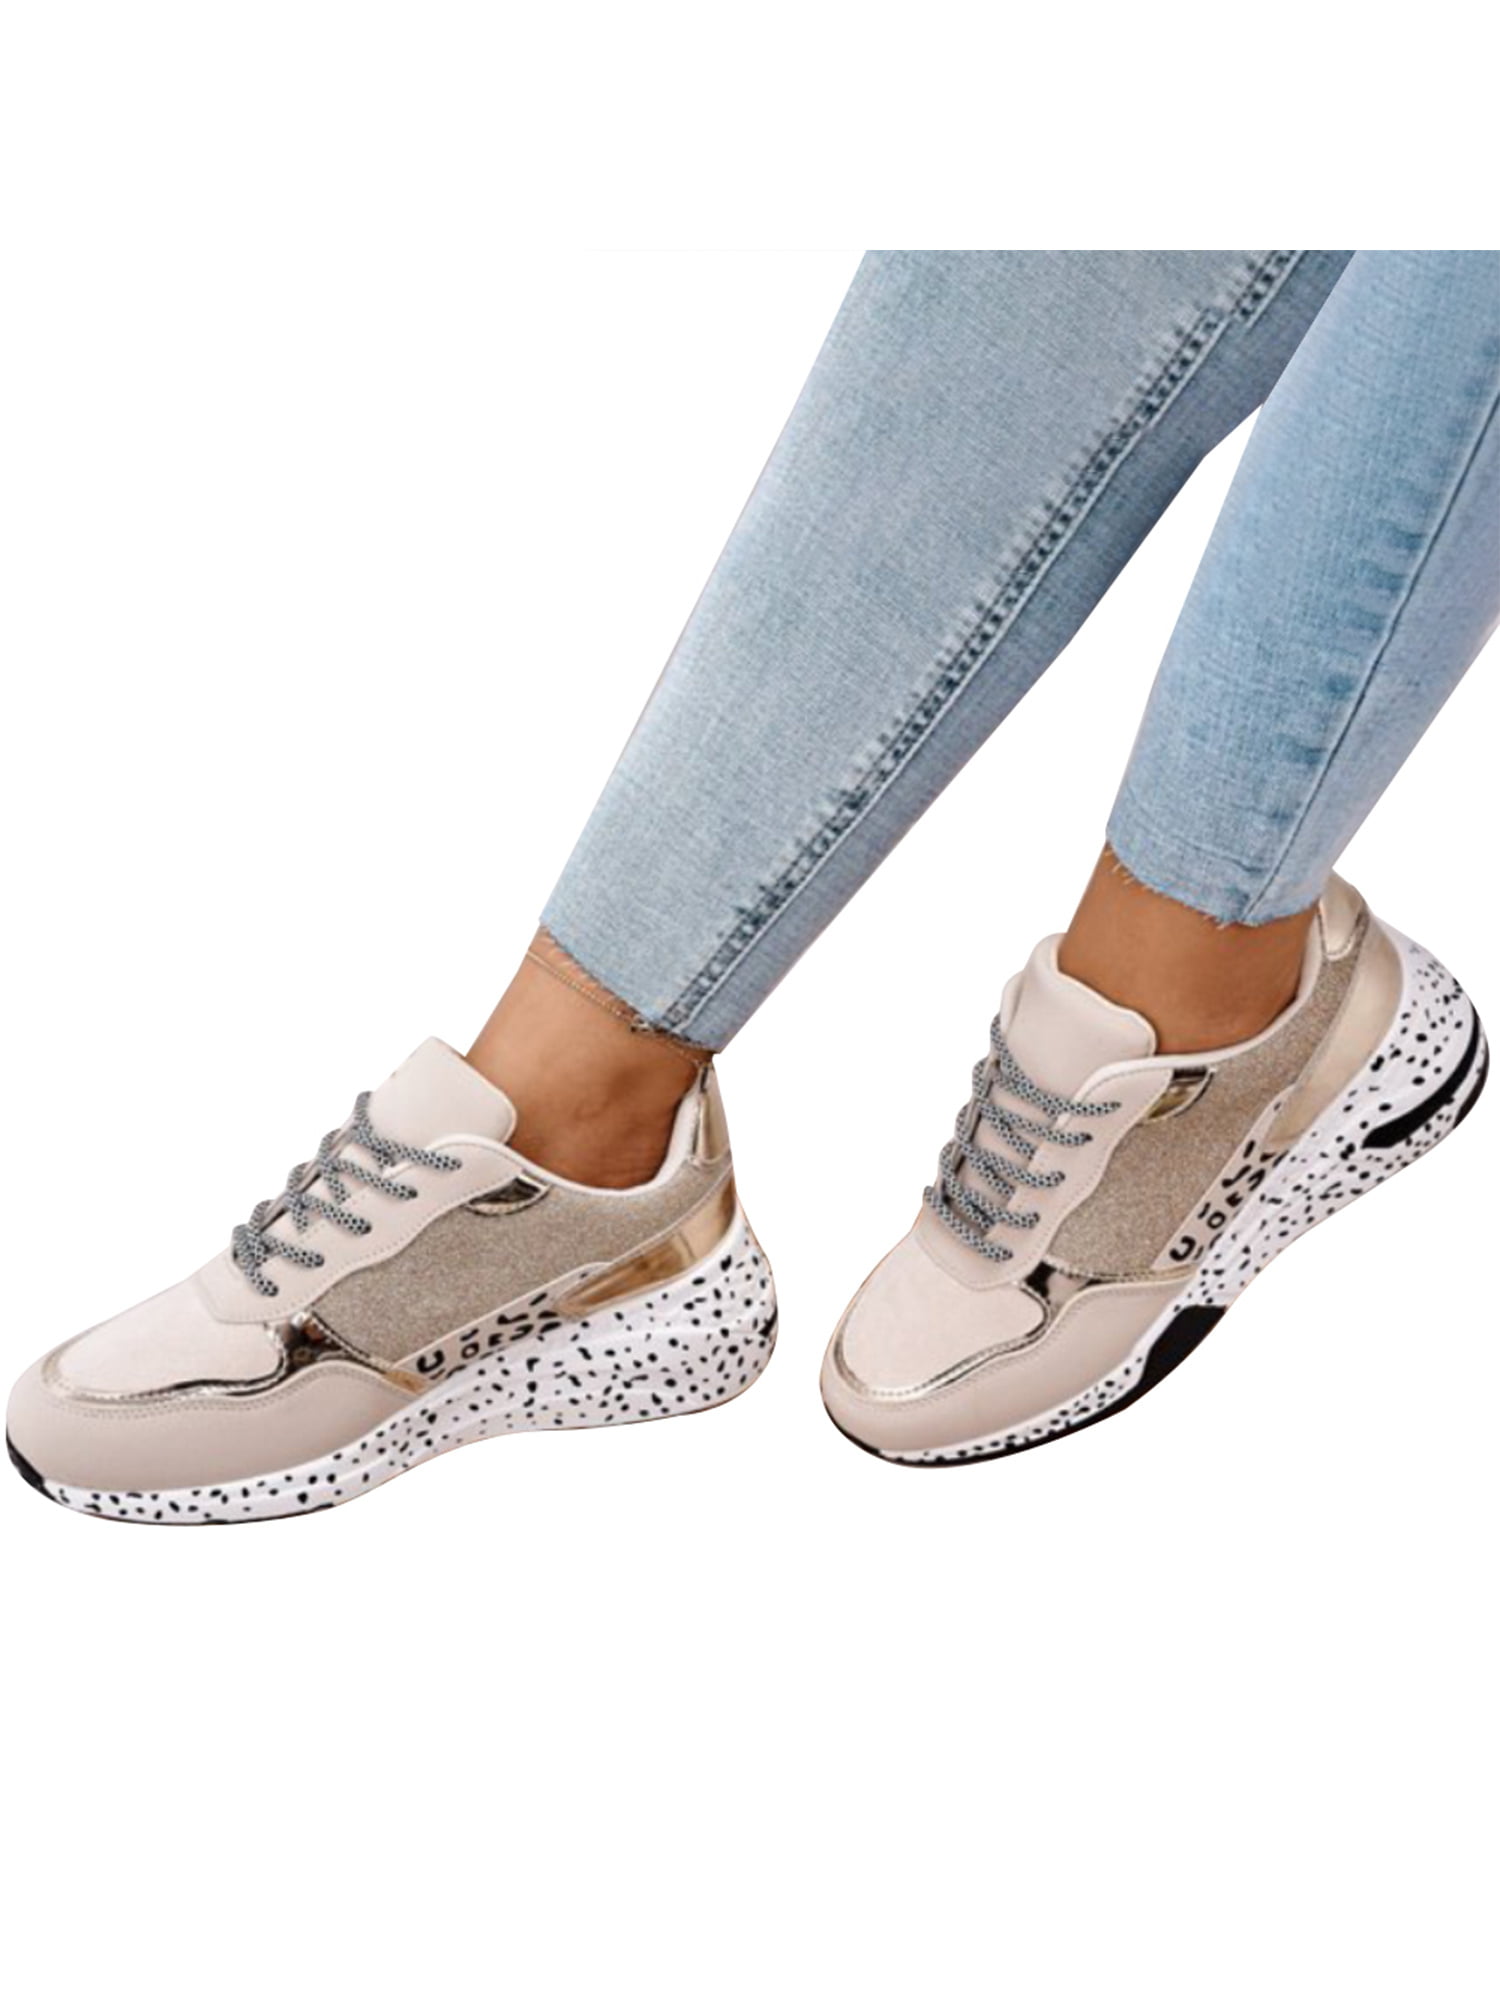 Womens Square Toe Platform Sneakers Lace-Up Thick Sole Fashion Plaid Printing Wedges Sport Shoes